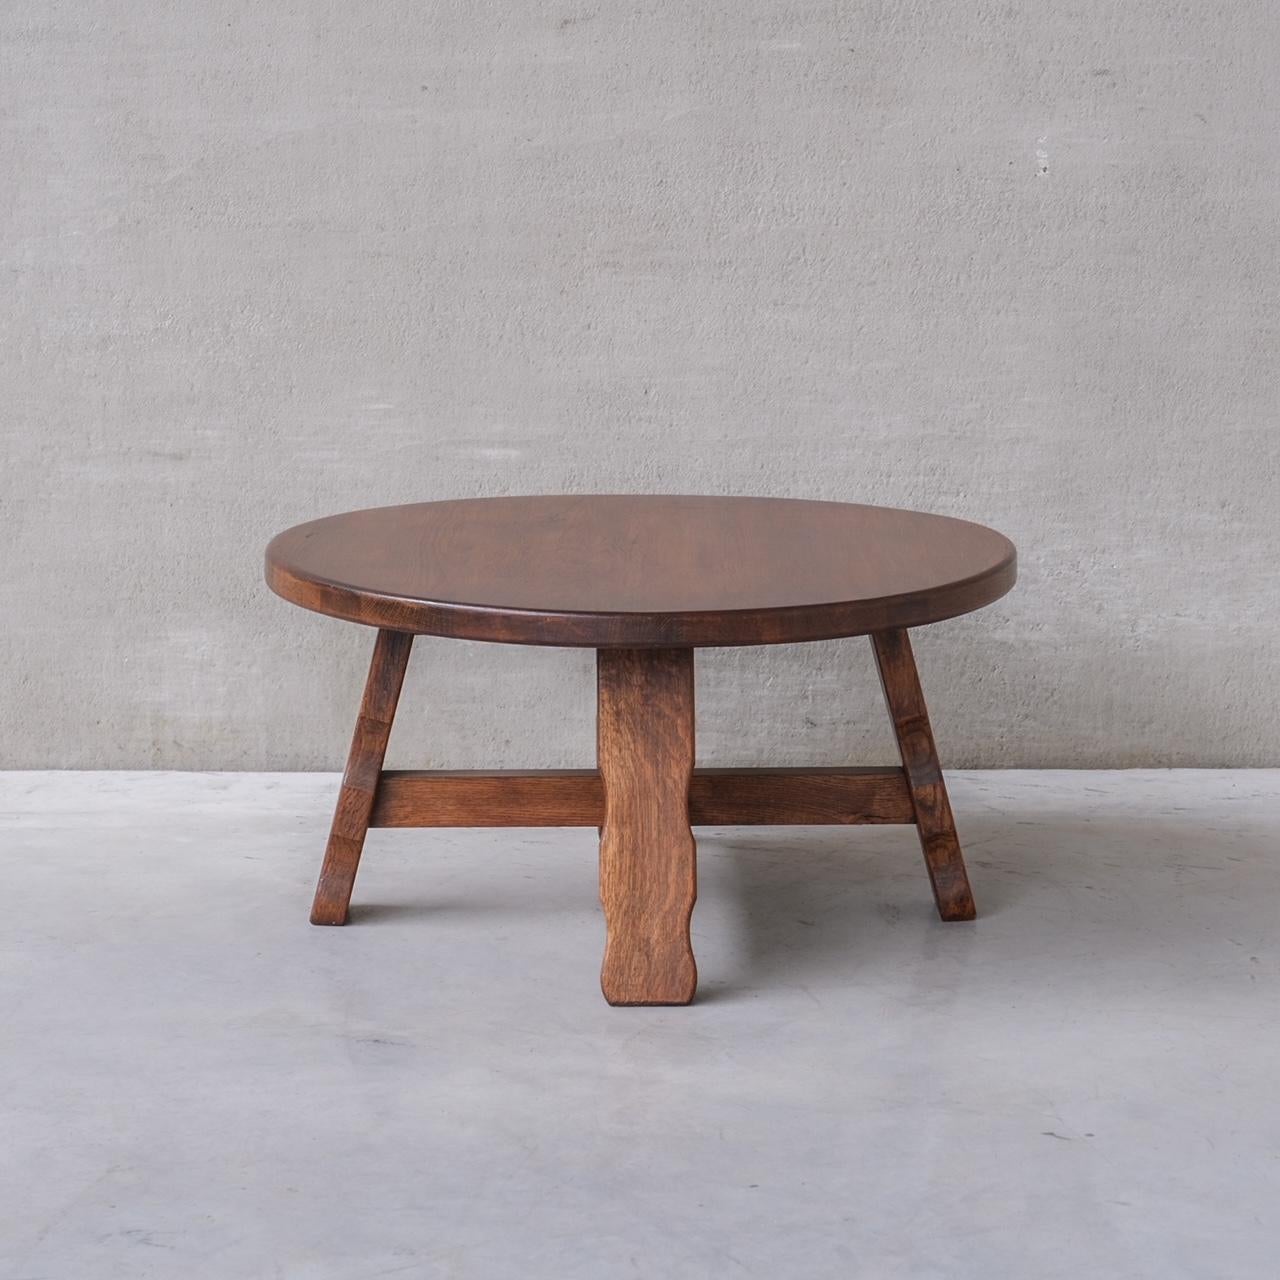 A circular brutalist coffee table. 

Belgium, c1970s. 

Simple clean lines, circular top over four legs. 

Good condition, some scuffs and wear commensurate with age.

INTERNAL REFERENCE: 284/CT004. 

Location: Belgium